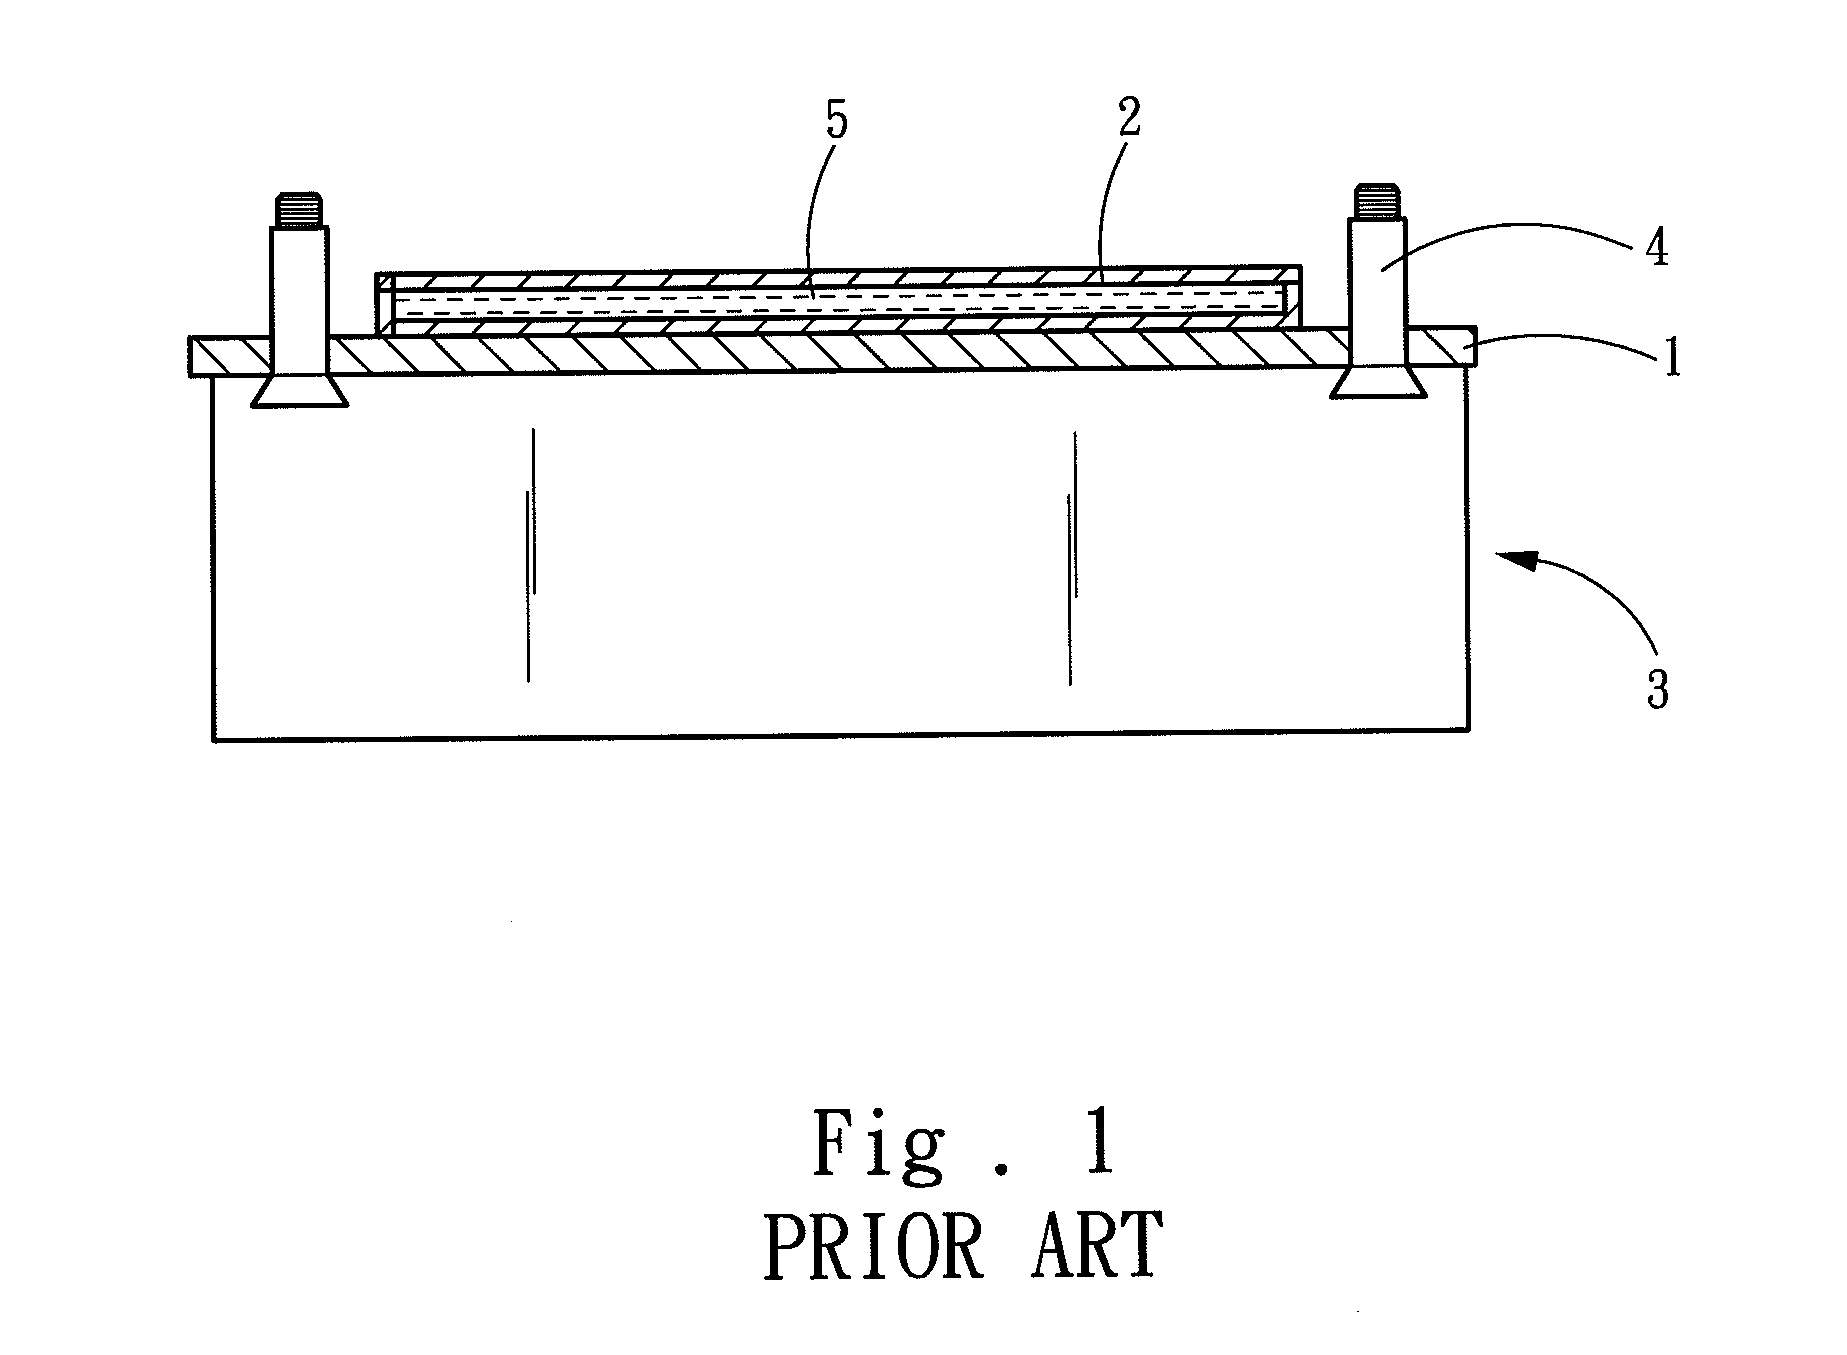 Heat sink equipped with a vapor chamber